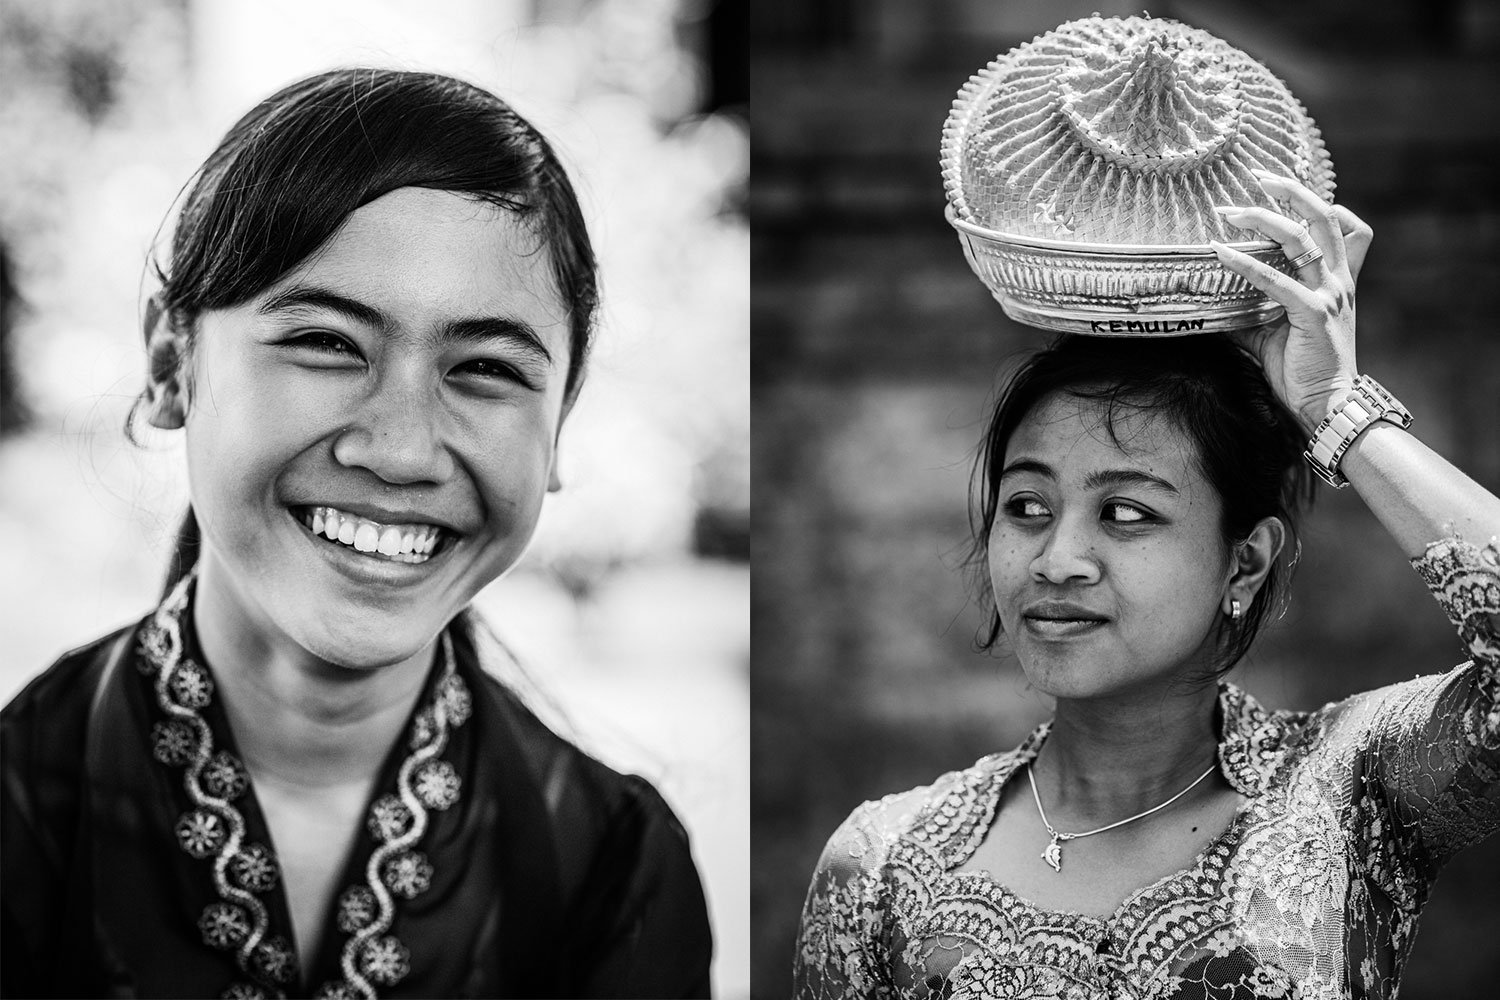 Portrait photo of two young women taken in Bali at a cremation